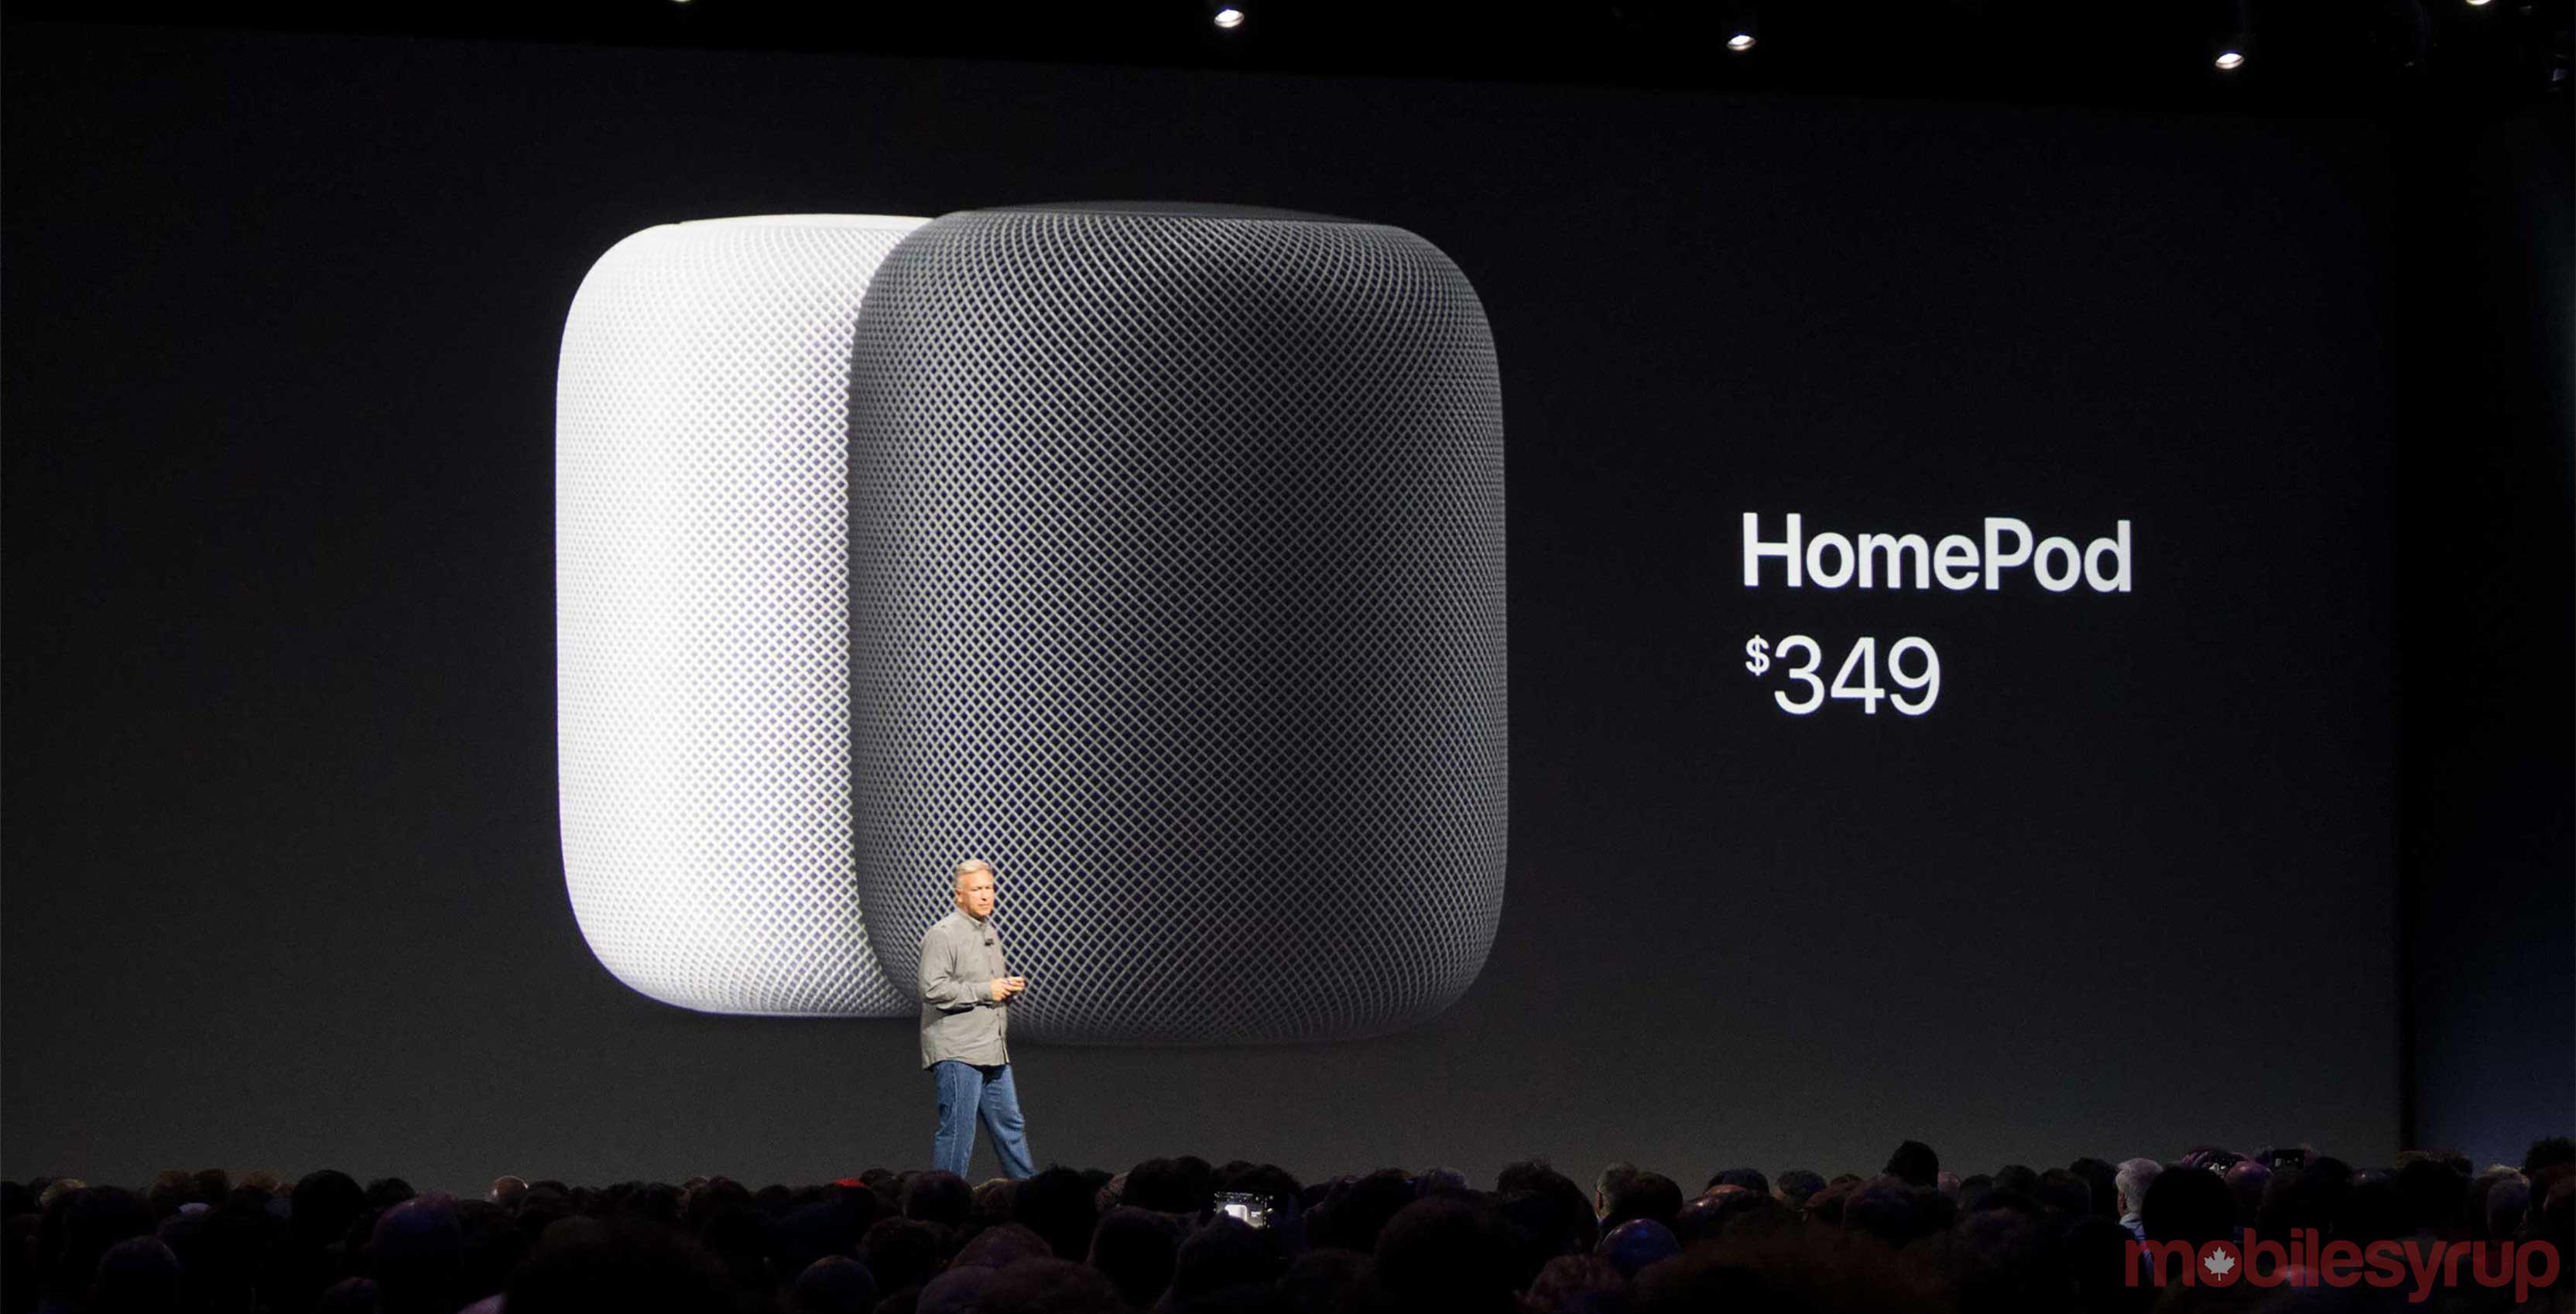 Apple pushes HomePod release to early 2018 because production needs 'a little more time'